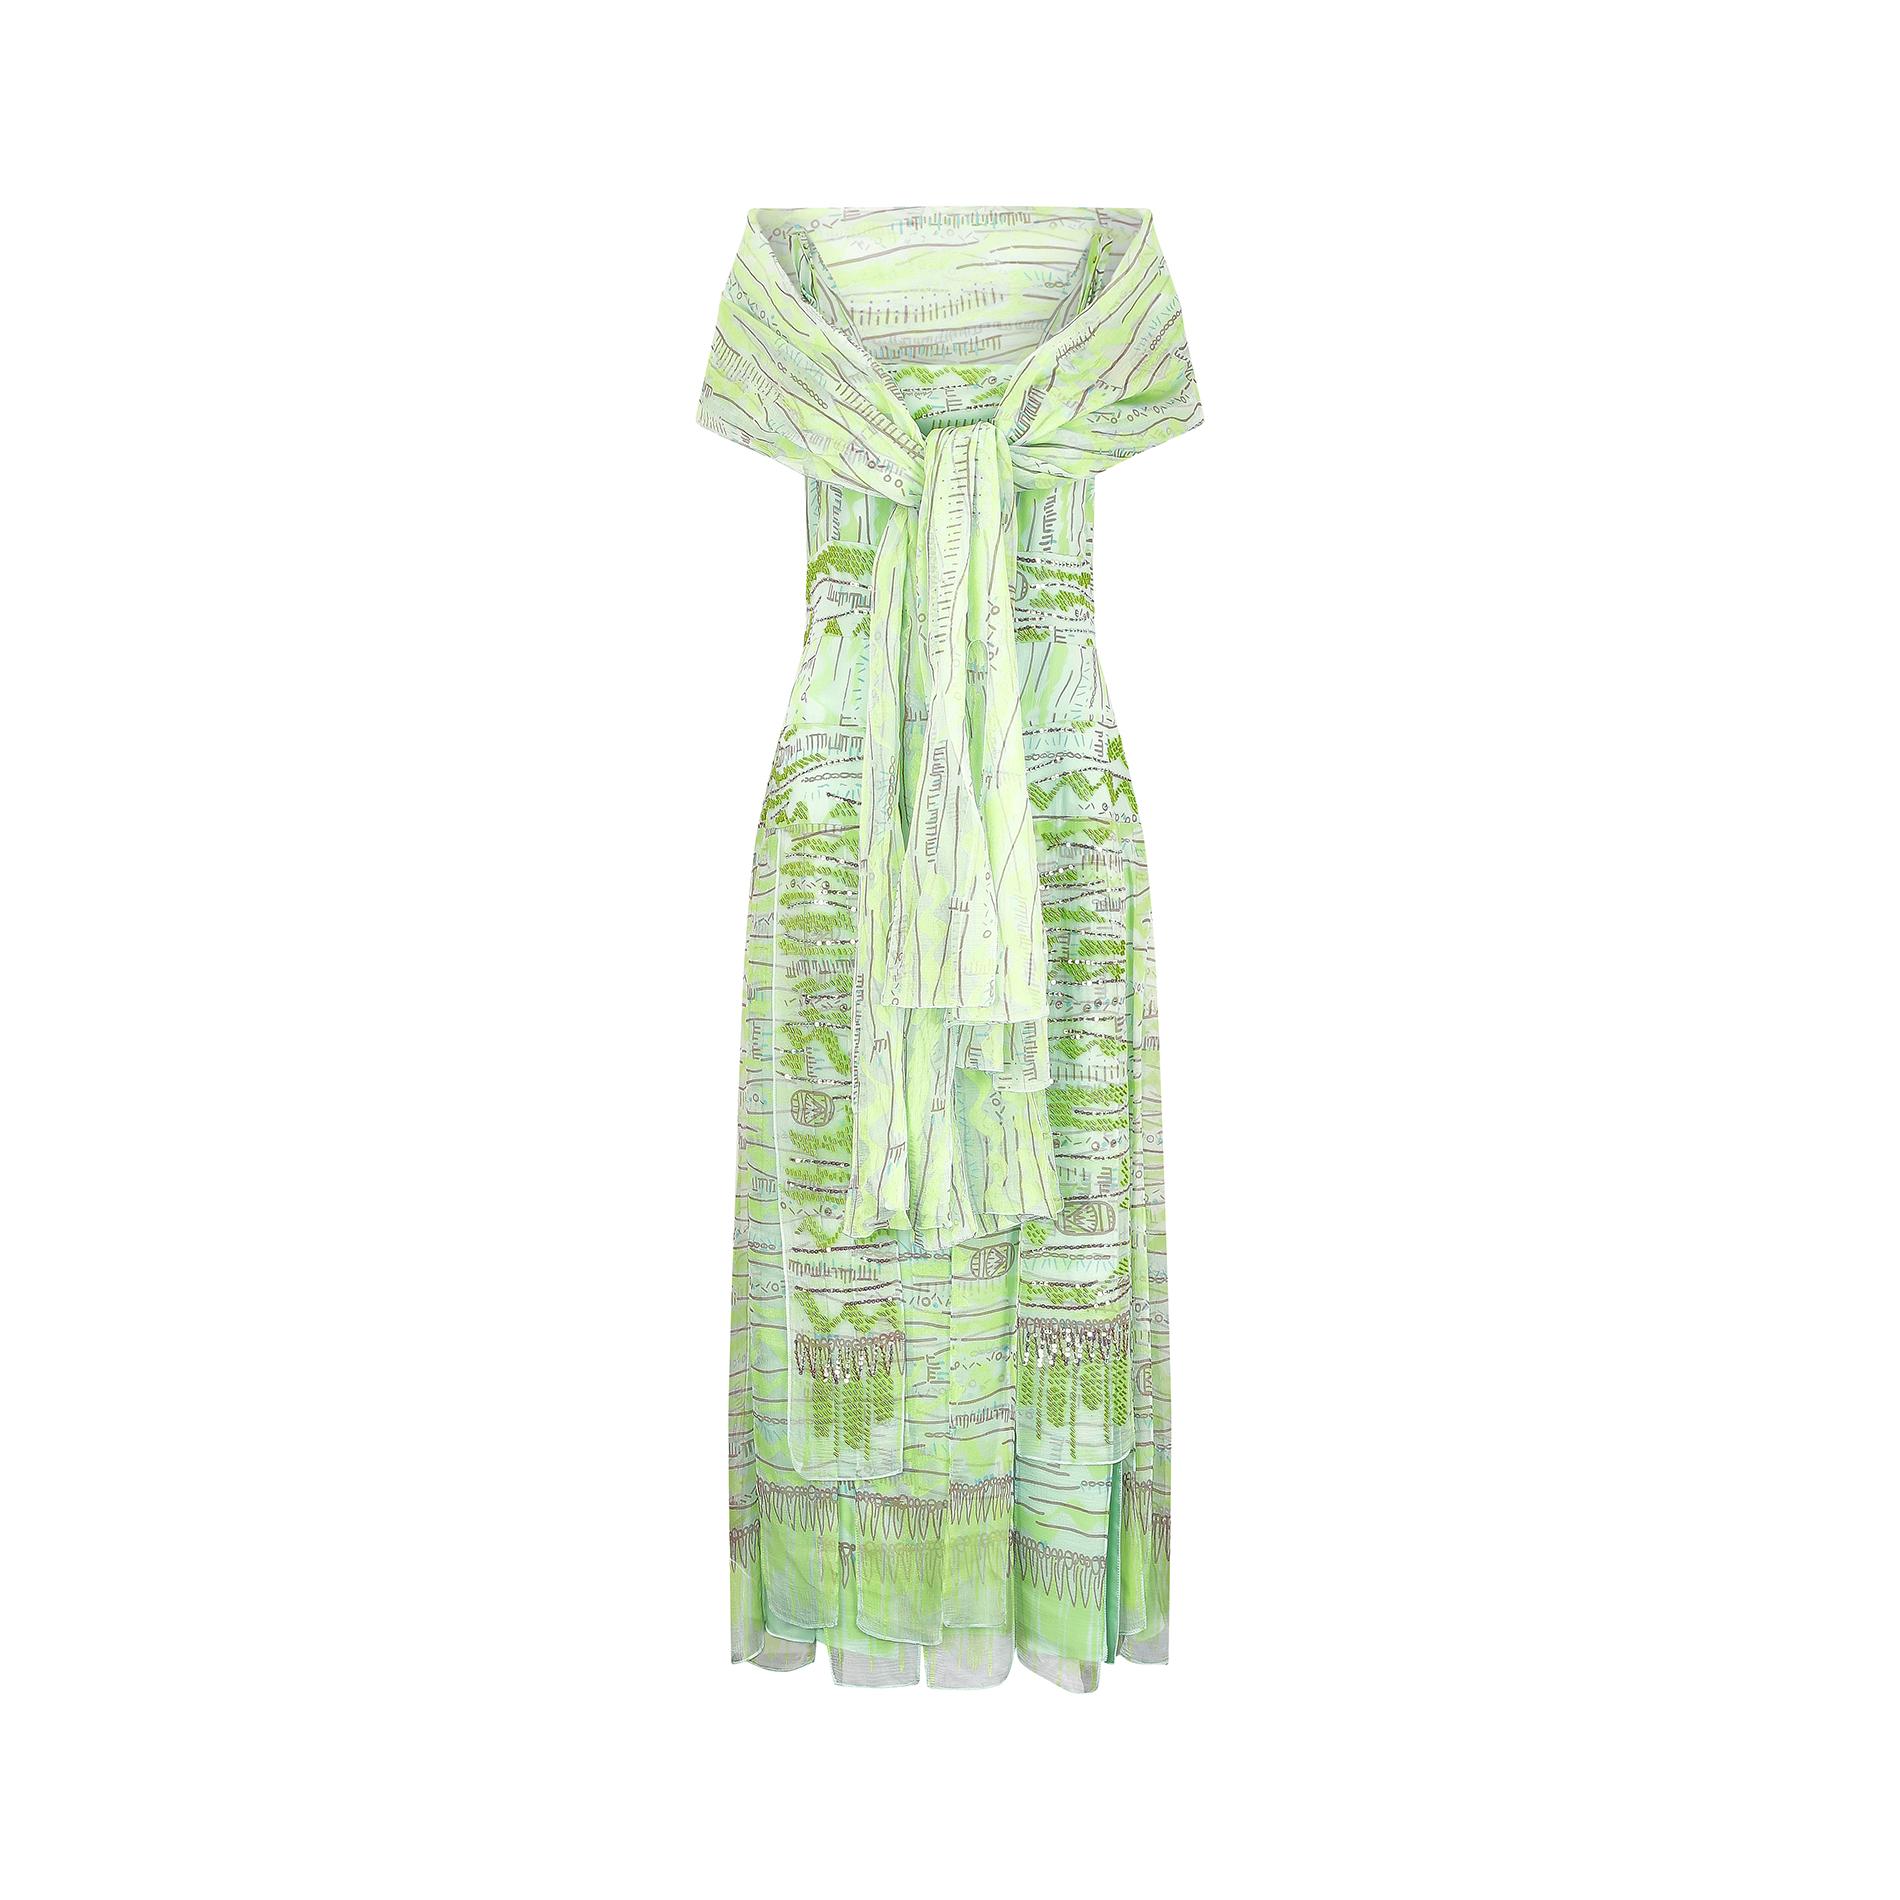 This beautiful Zandra Rhodes couture dress and scarf ensemble is cut in really gorgeous shades of green silk chiffon.  Her abstract, signature screen-printed fabric is worked by hand in a lime, apple green, white and silvery brown colourway, with